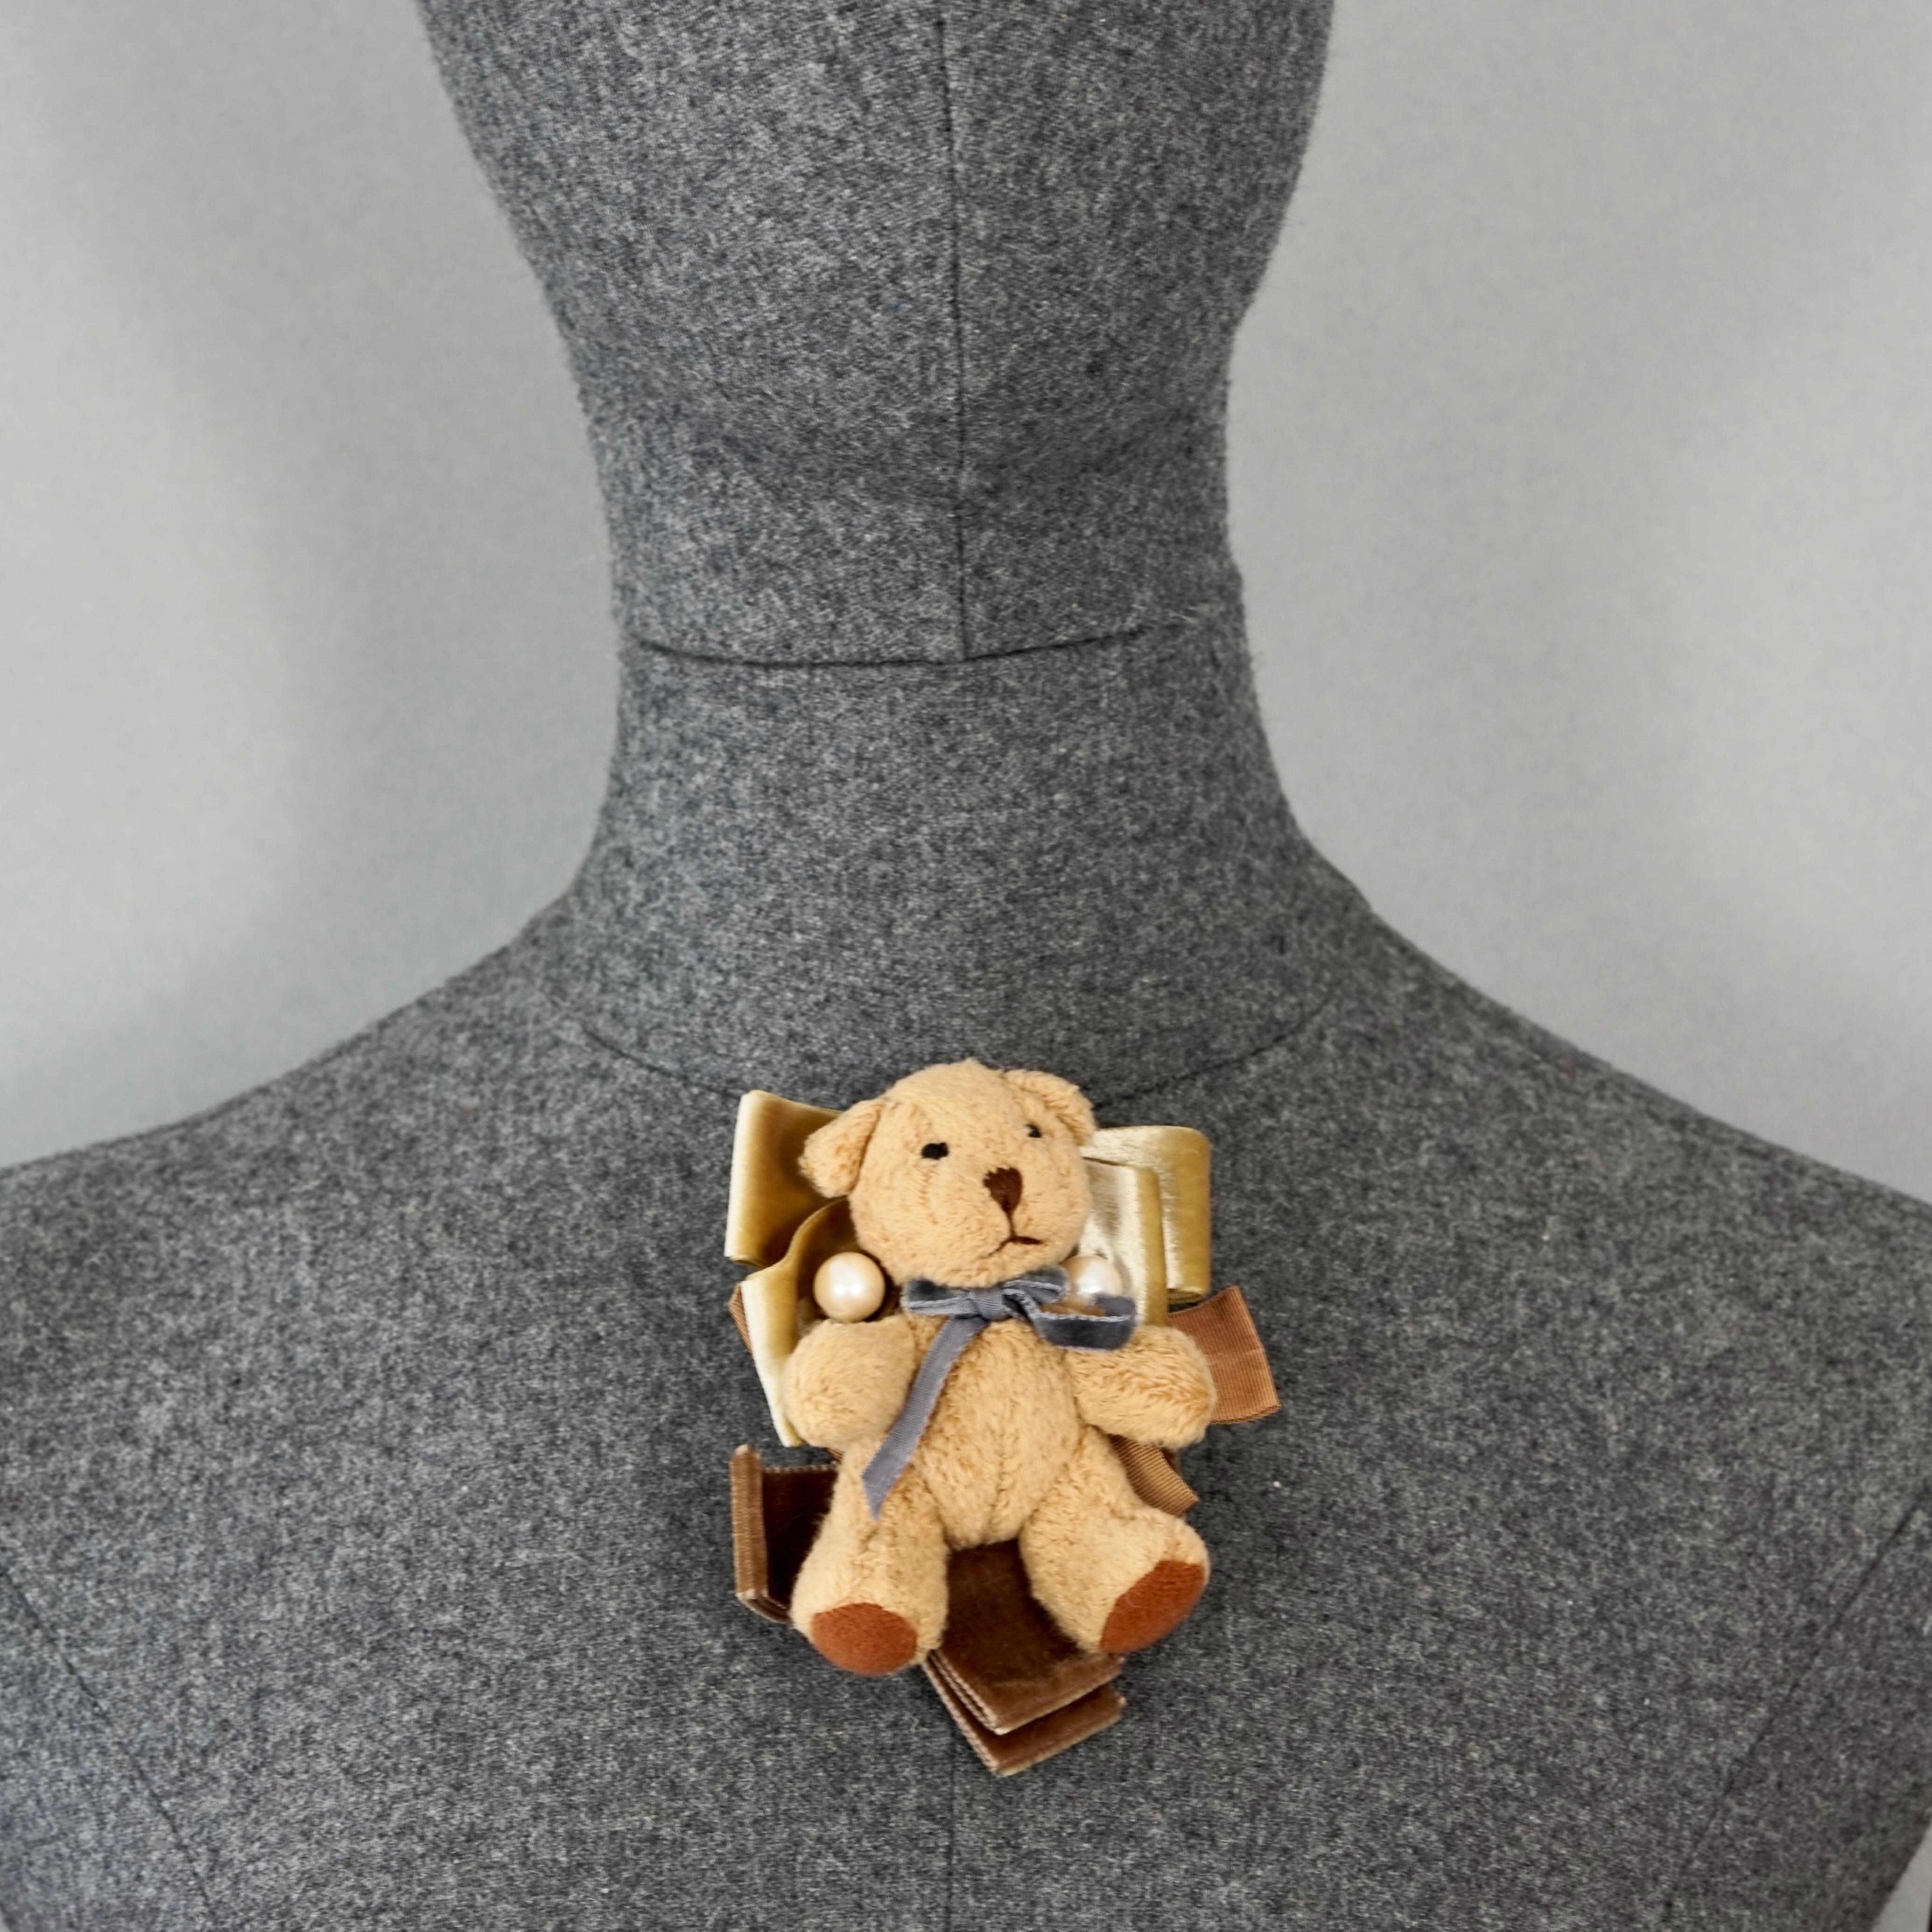 Vintage MOSCHINO Teddy Bear Novelty Brooch

Measurements: 
Height: 3.94 inches (10 cm)
Width: 3.35 inches (8.5 cm)

Features:
- 100% Authentic MOSCHINO.
- Plush teddy bear brooch.
- Signed MOSCHINO on reverse.